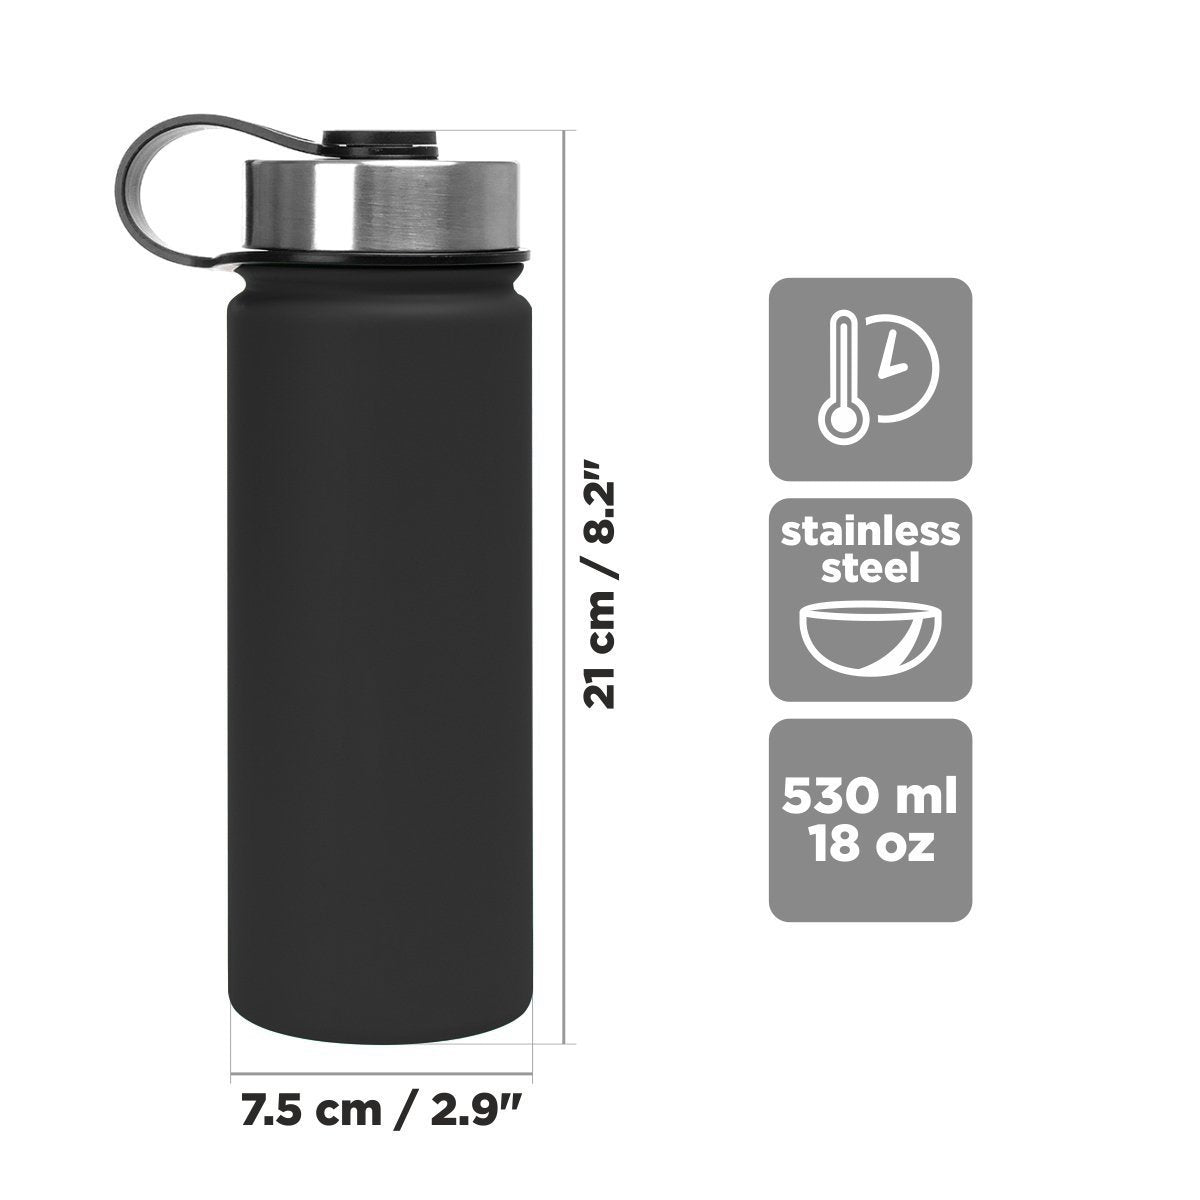 Stainless Steel Insulated Sport Water Bottle with 3 Lid Types, 18 oz is 8.2 inches high and 2.9 inches wide